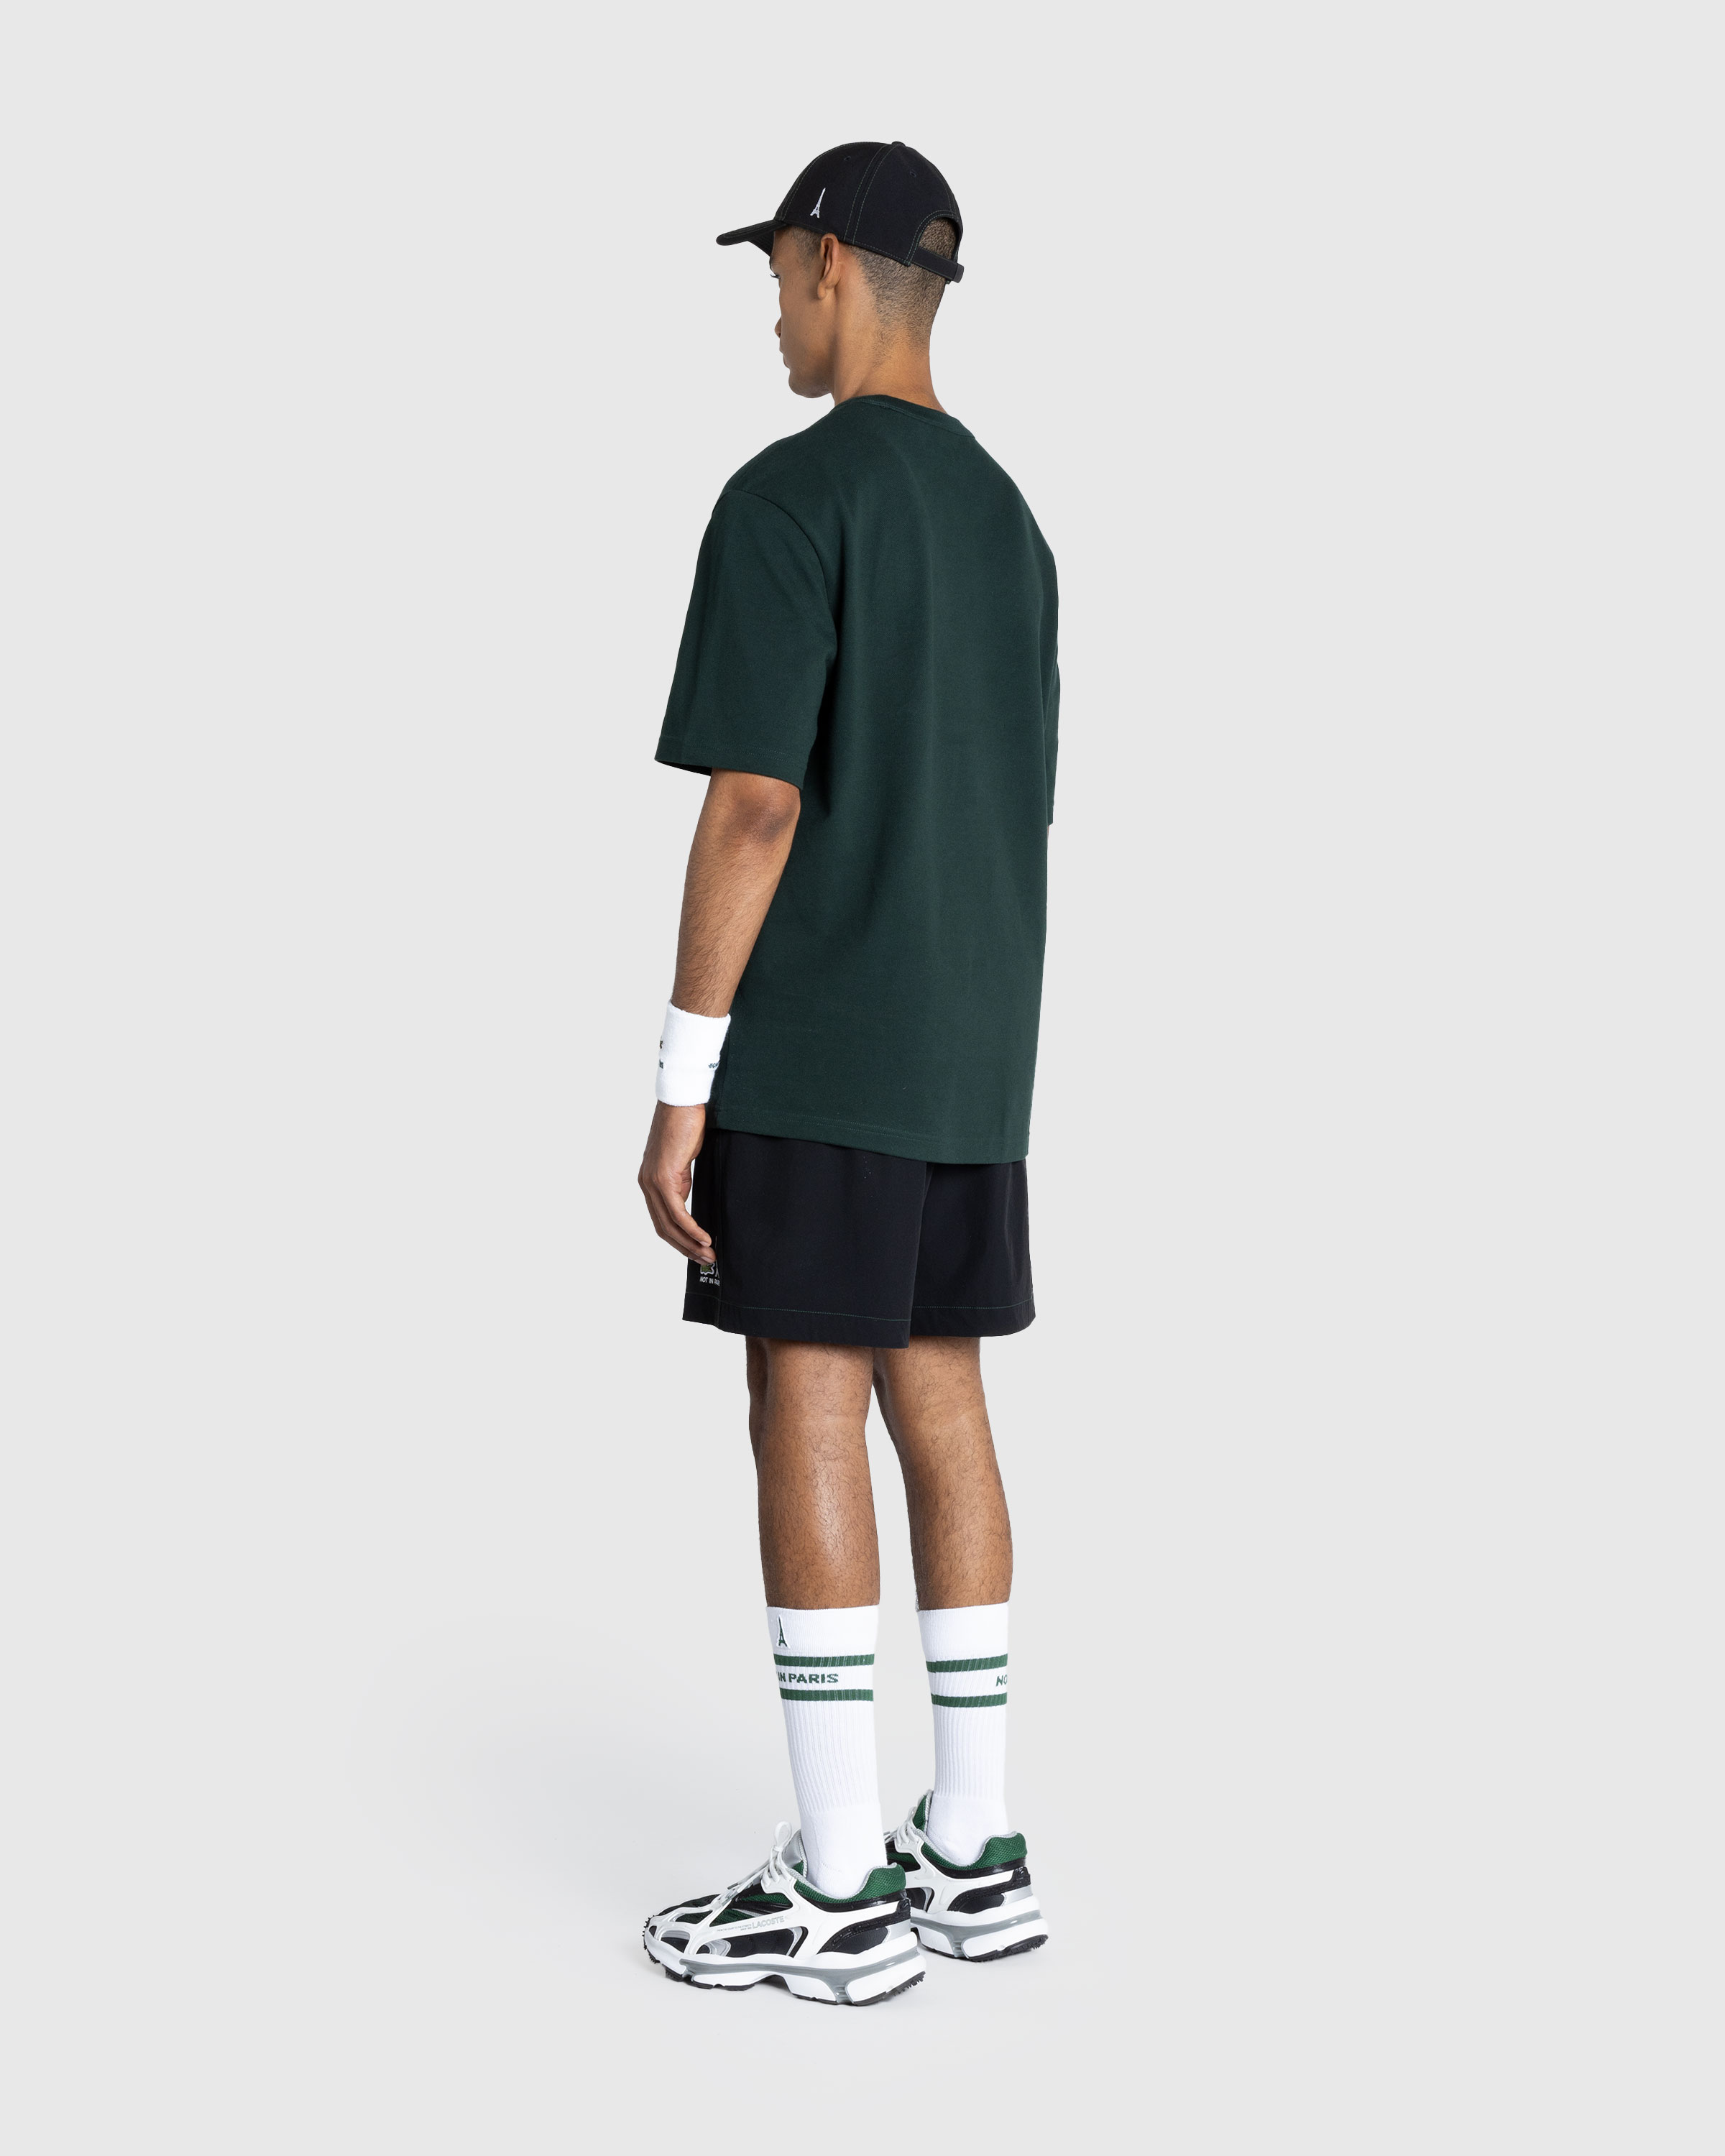 Lacoste x Highsnobiety – Not In Paris Tennis Shorts Black - Active Shorts - Sinople - Image 5